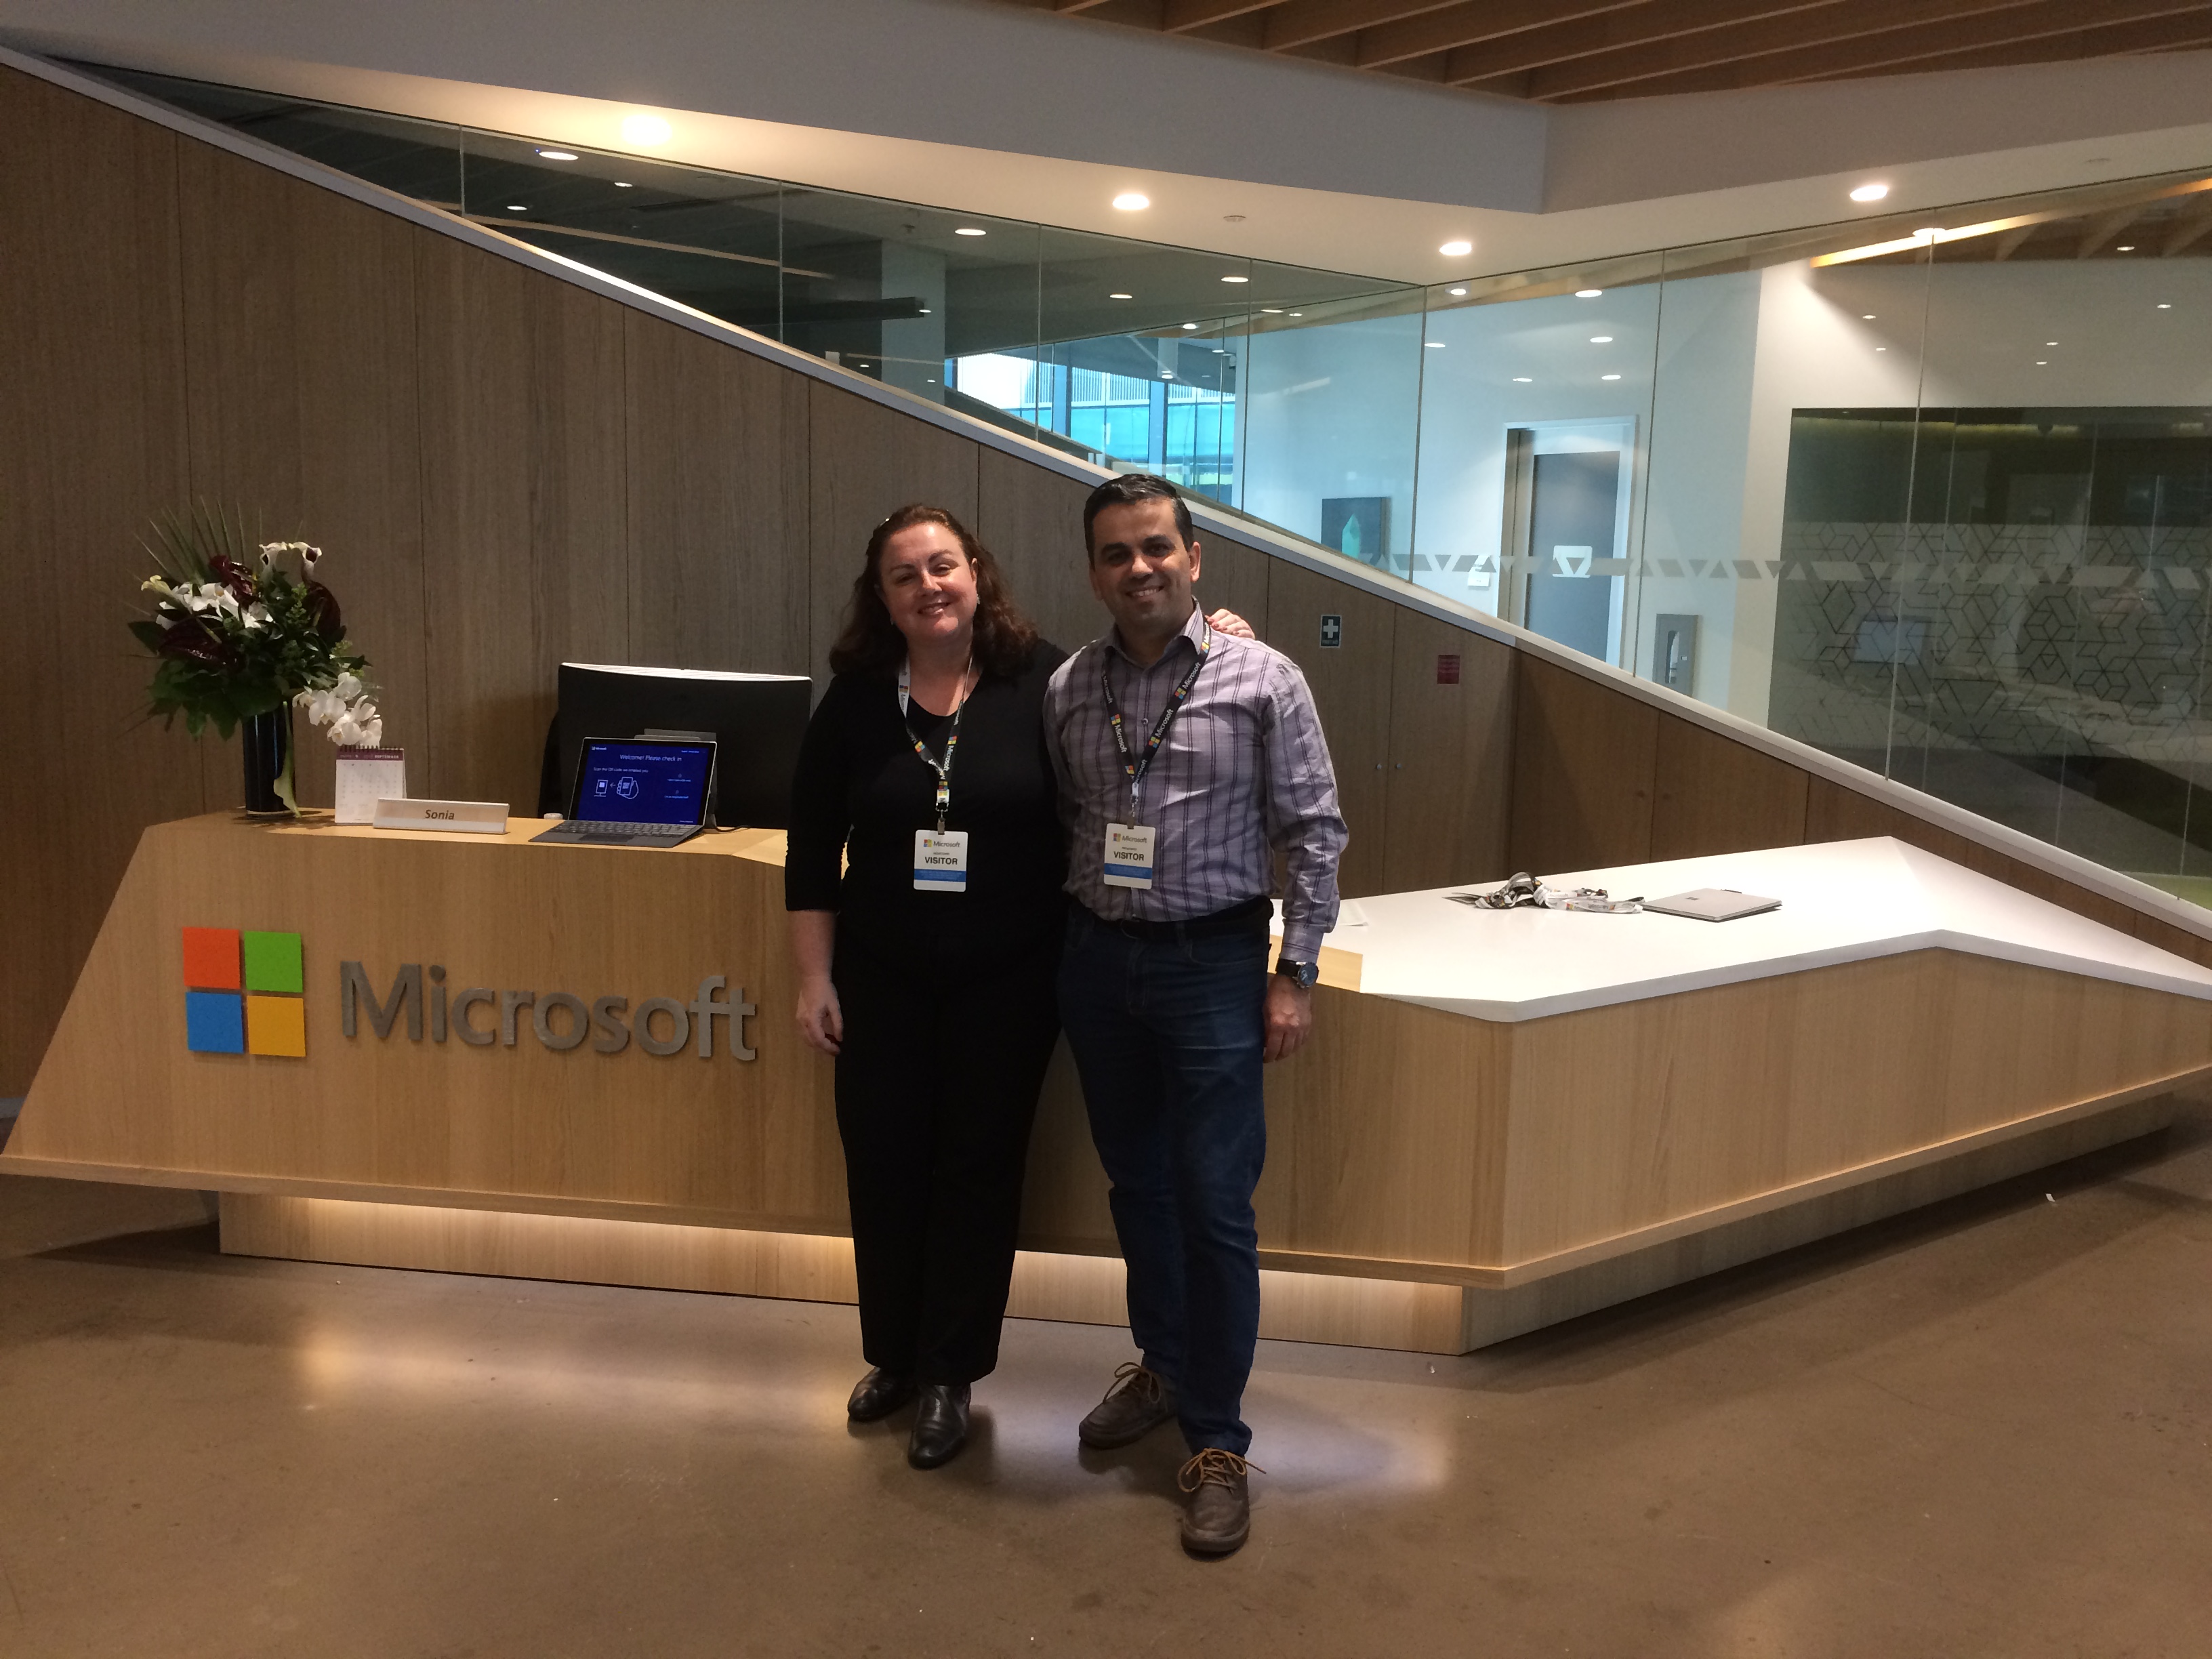 Pat & André - Both visiting event on Microsoft in VSW